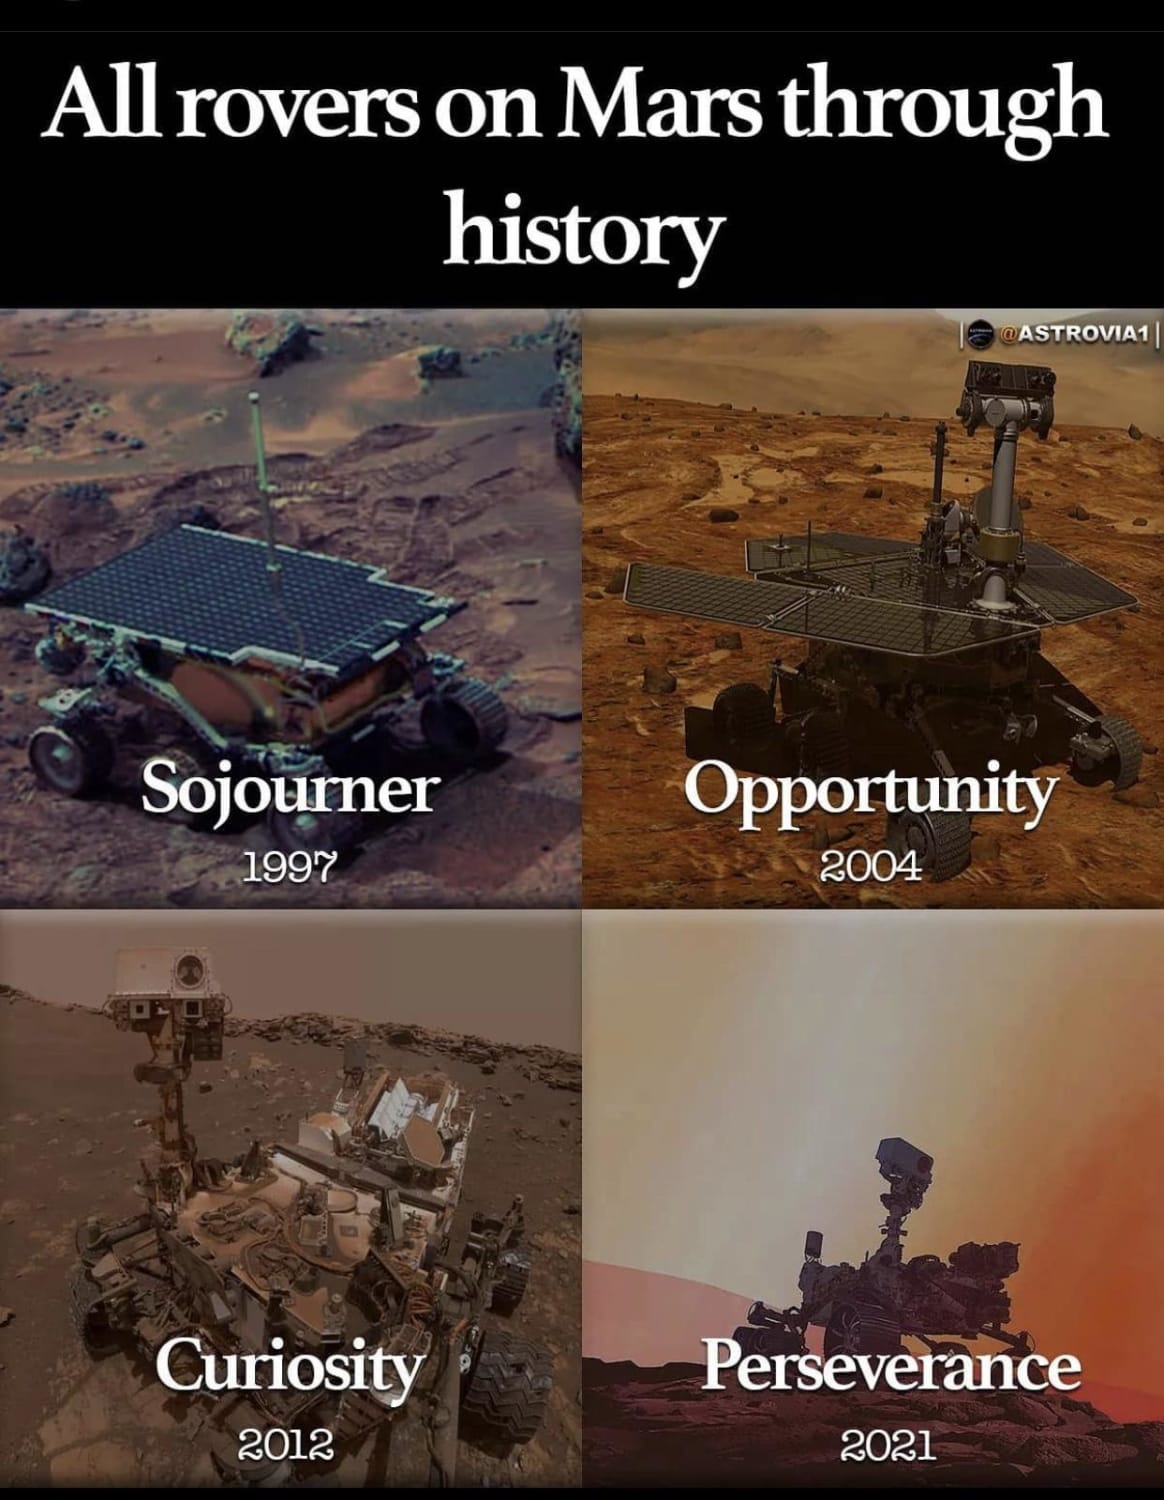 All the rovers deployed on Mars throughout the years.